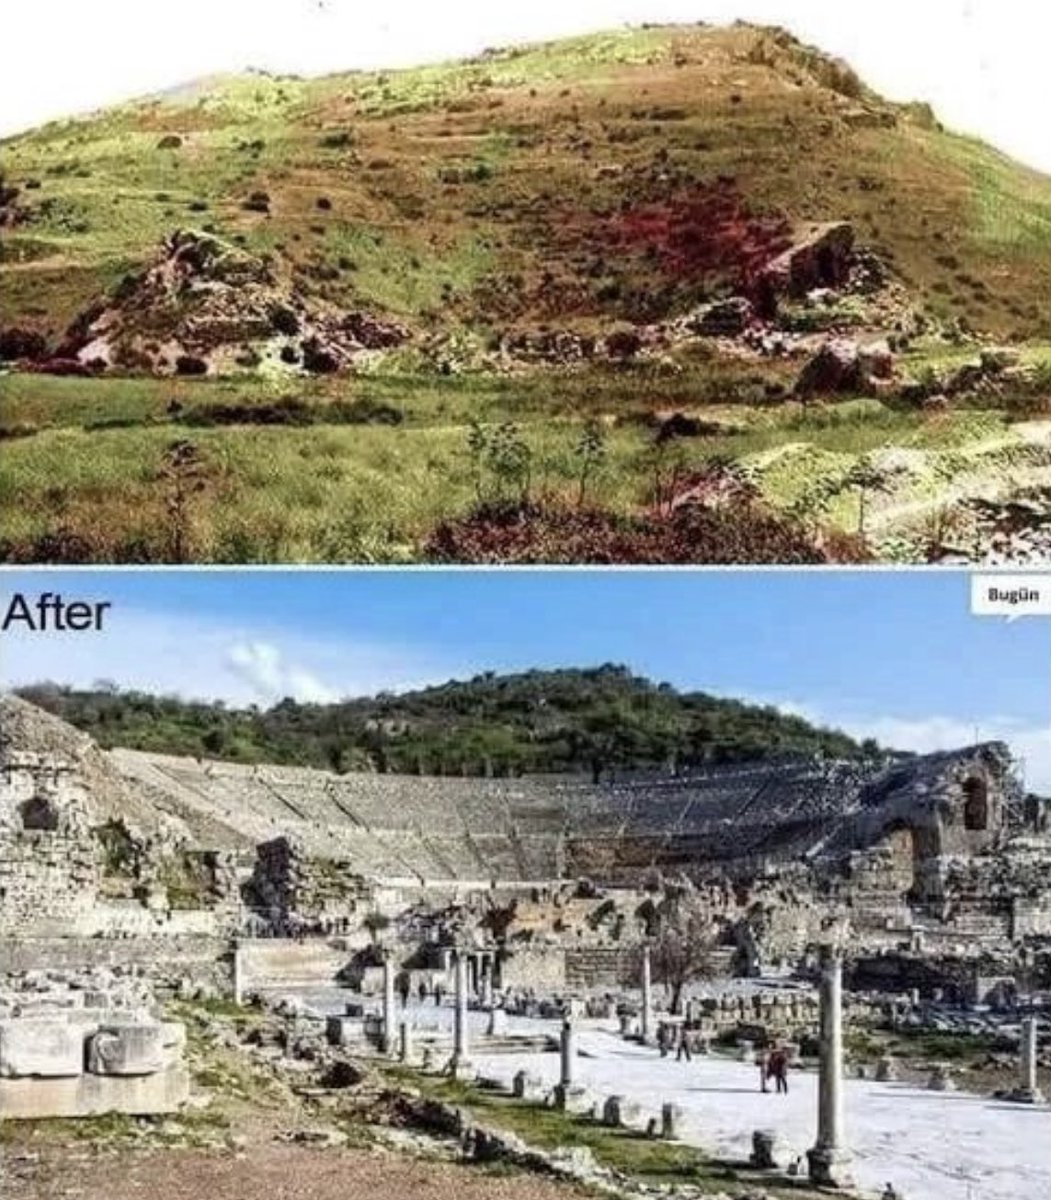 The ancient city of Ephesus before and after excavations: 

Ephesus was an ancient port city whose well-preserved ruins are located in modern-day Turkey. The city was once considered the most important Greek city and the primary trading center in the Mediterranean region.…